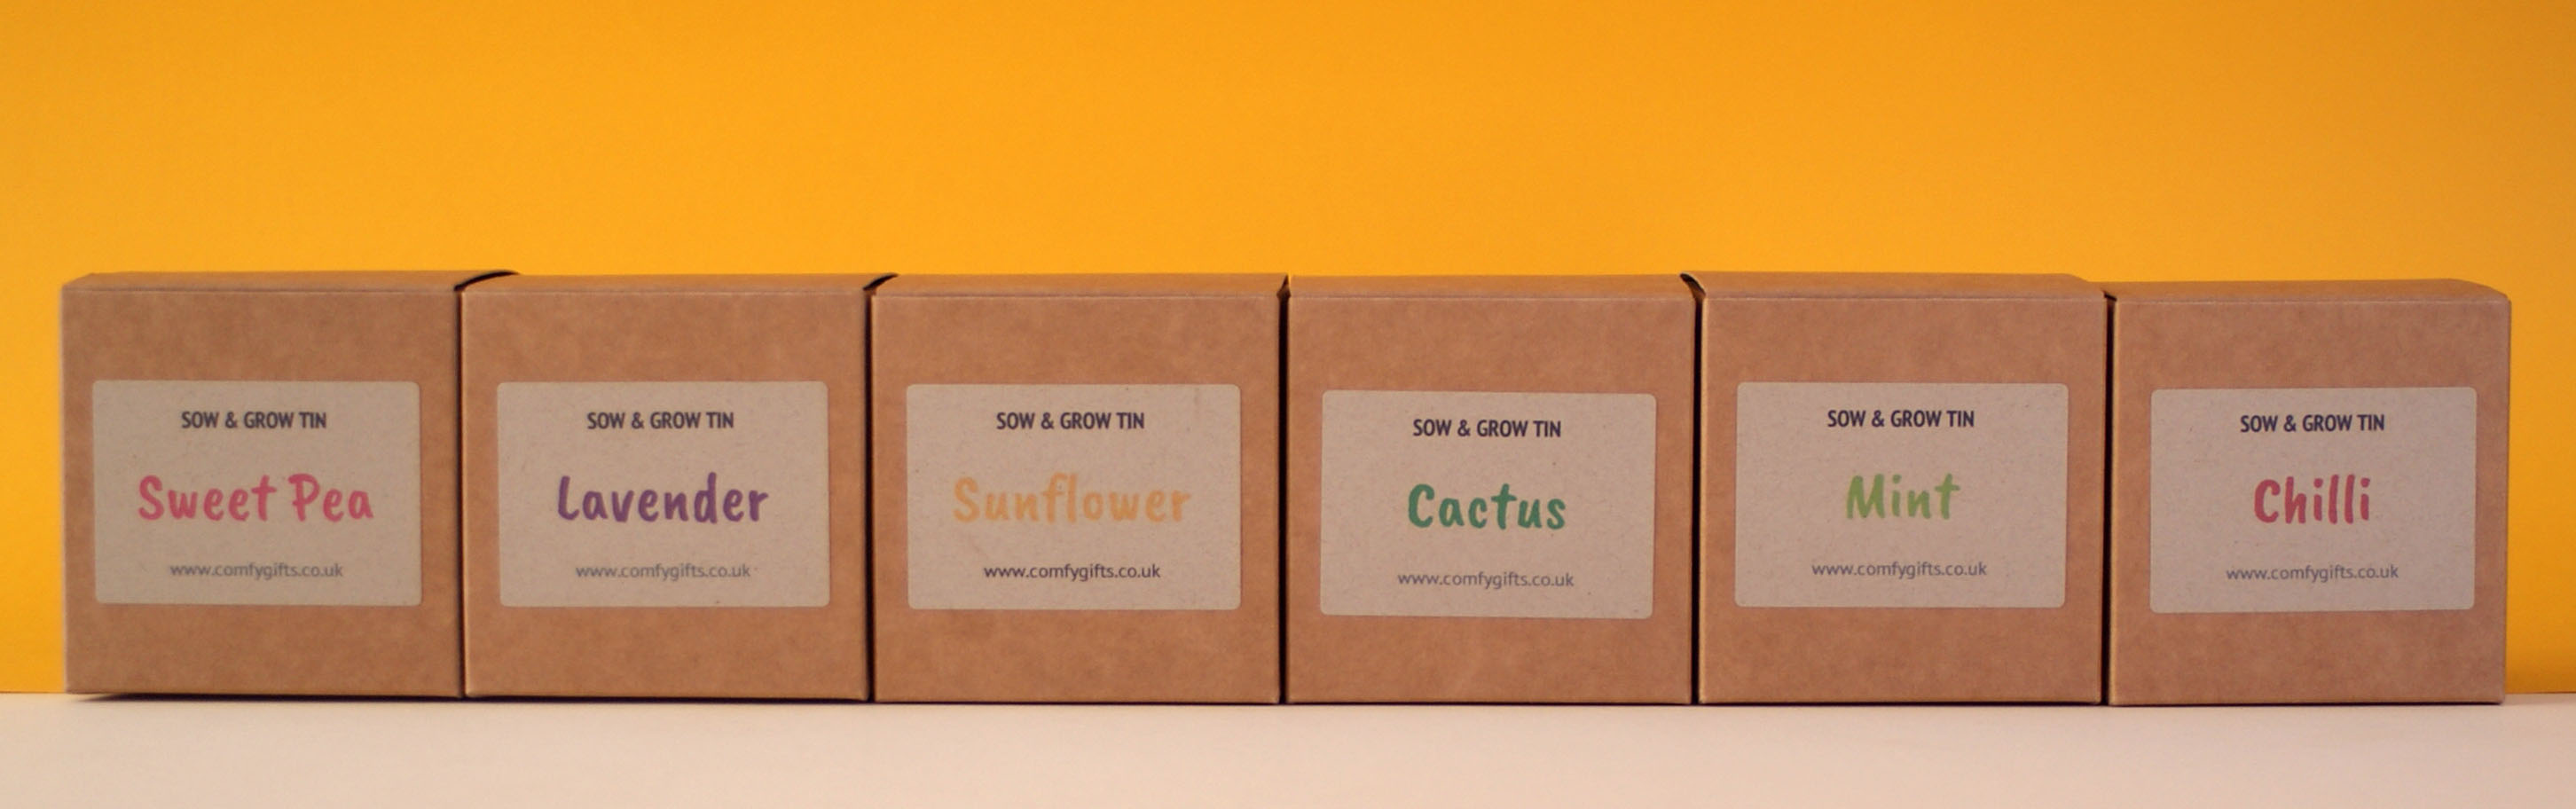 Sow & Grow Tins - fun grow your own gifts delivered